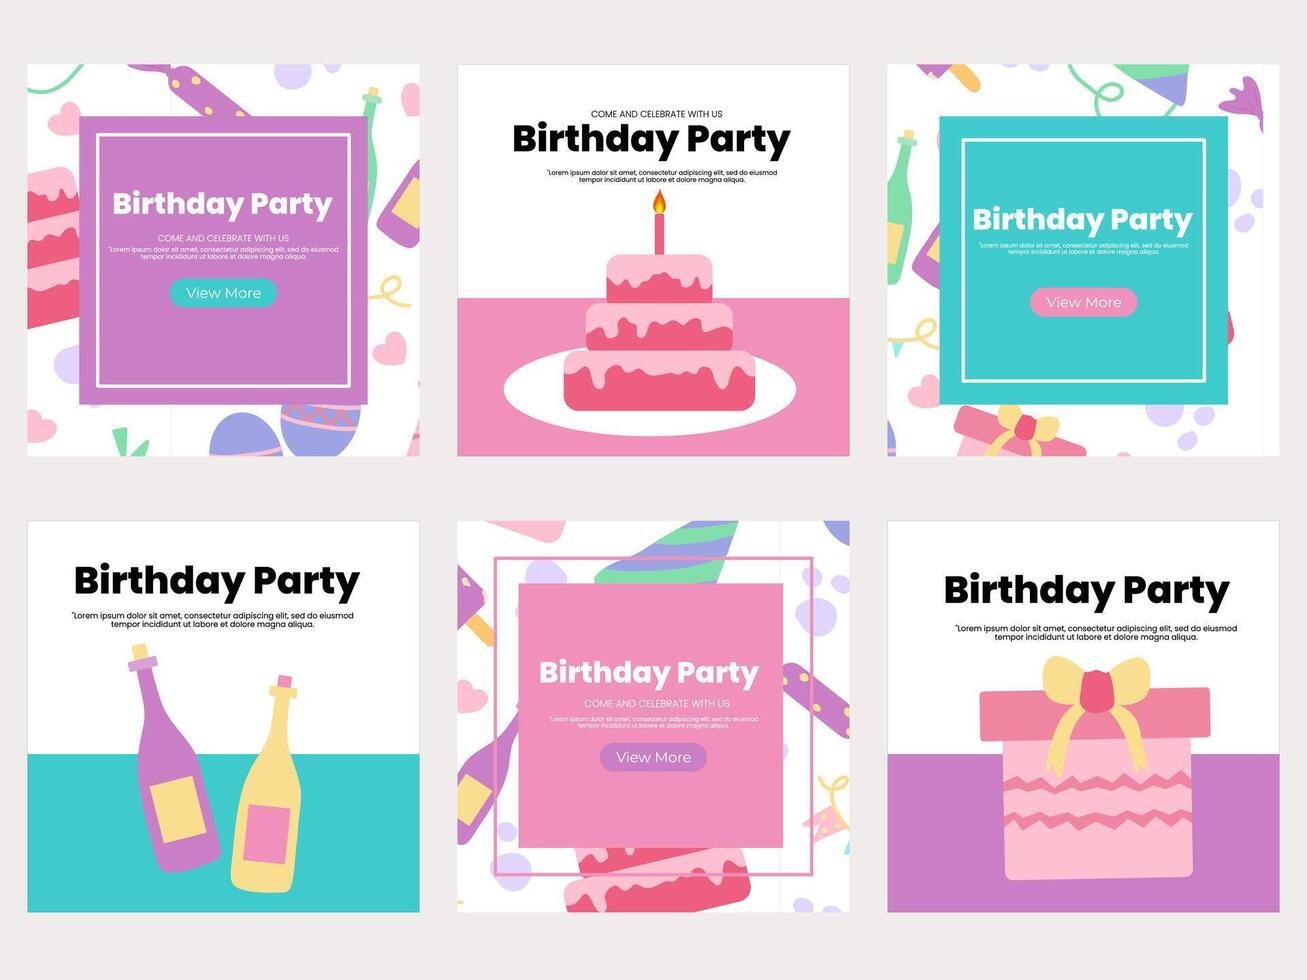 Birthday party social media banners template. Social media post with hand drawn element vector illustration